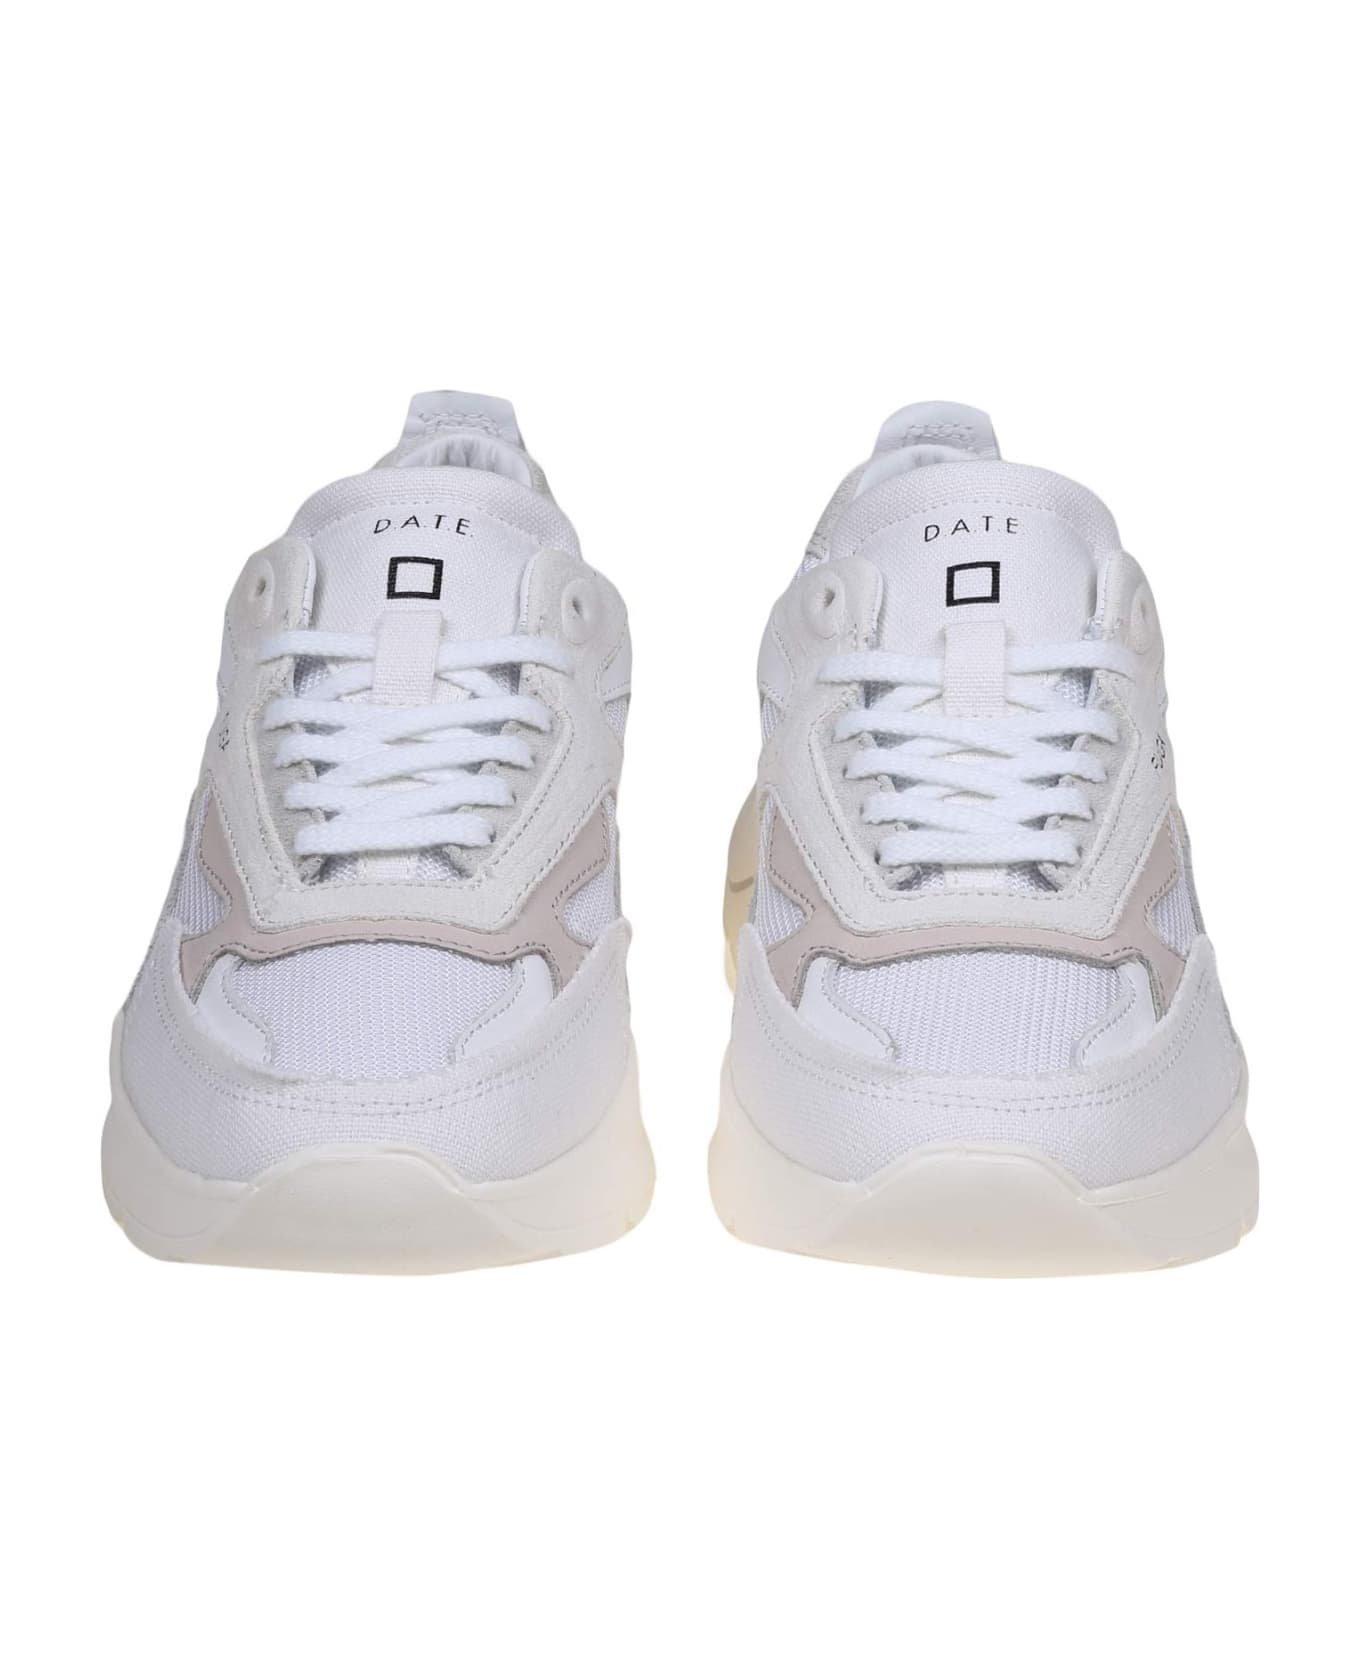 D.A.T.E. Fuga Sneakers In White Leather And Fabric - White スニーカー